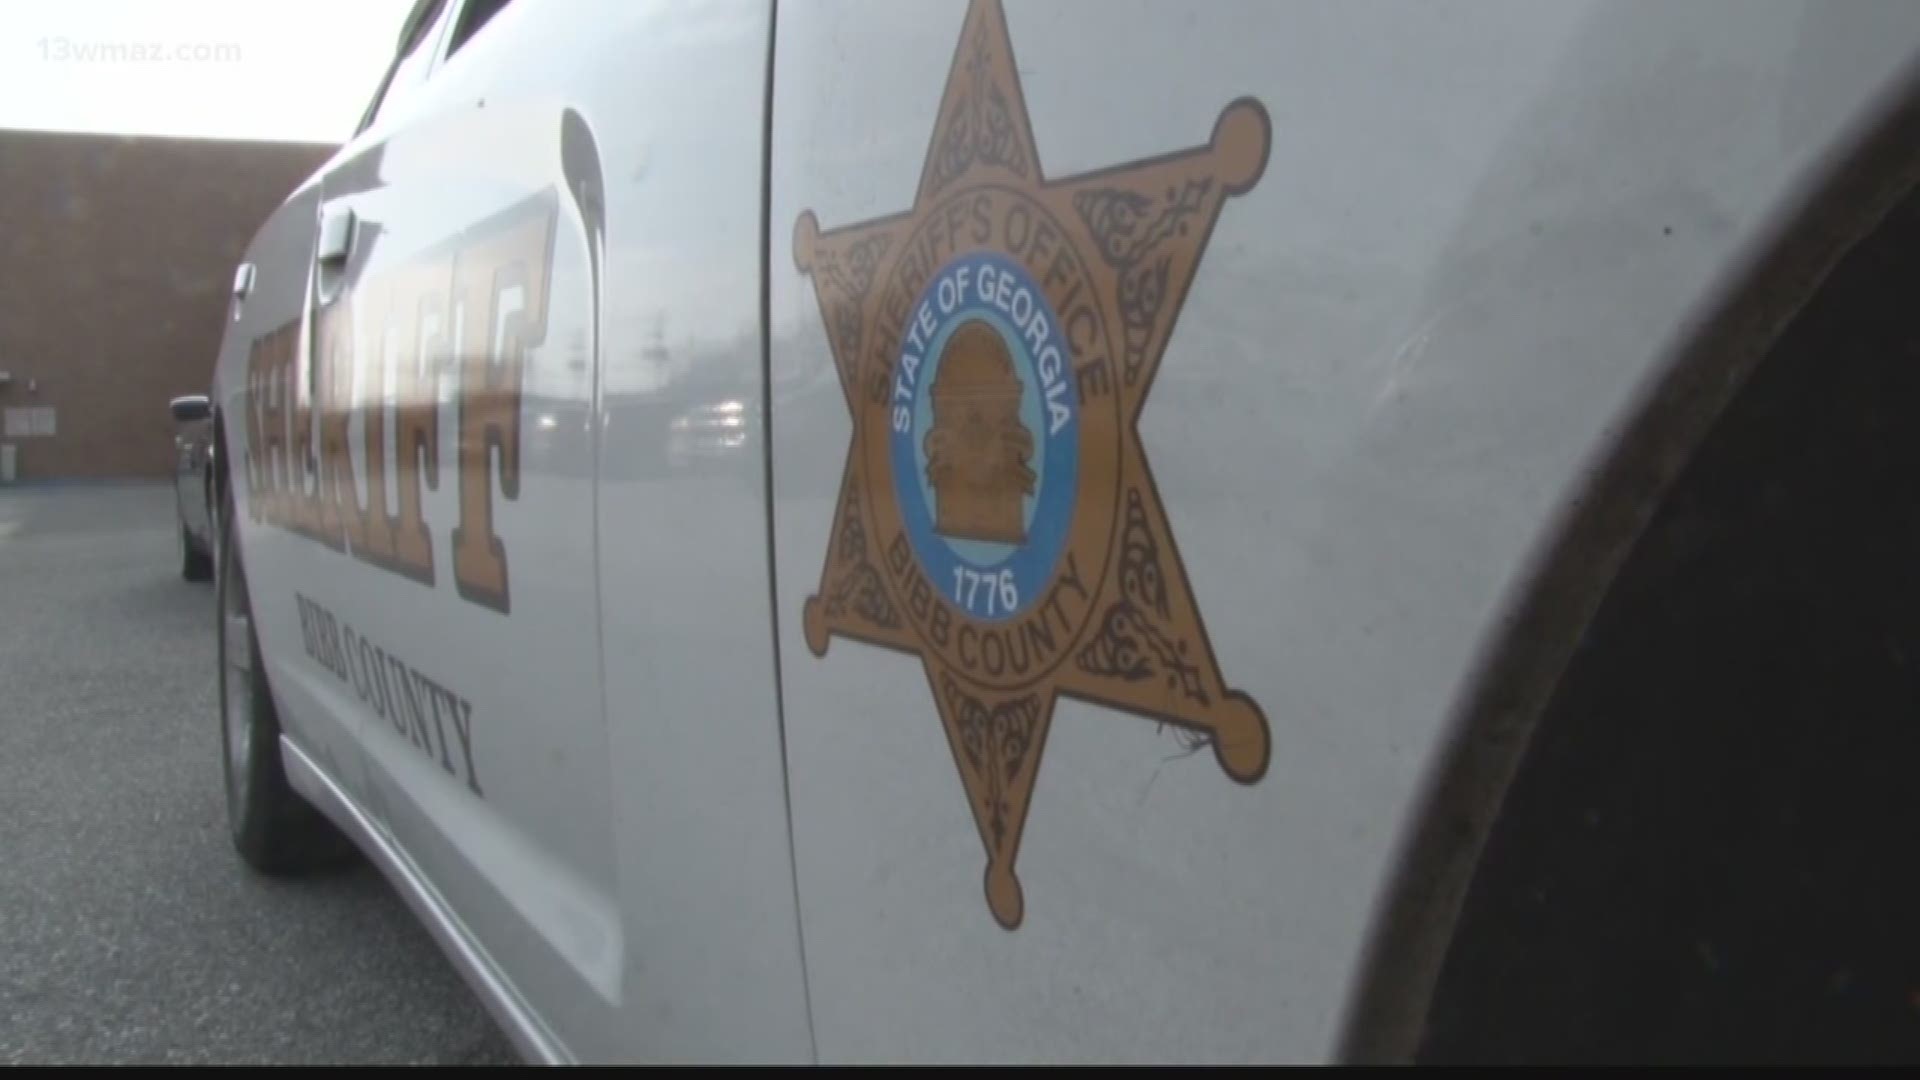 Bibb County Sheriff David Davis says his department is so short-staffed, his officers have run up more than a $1 million of unbudgeted overtime.